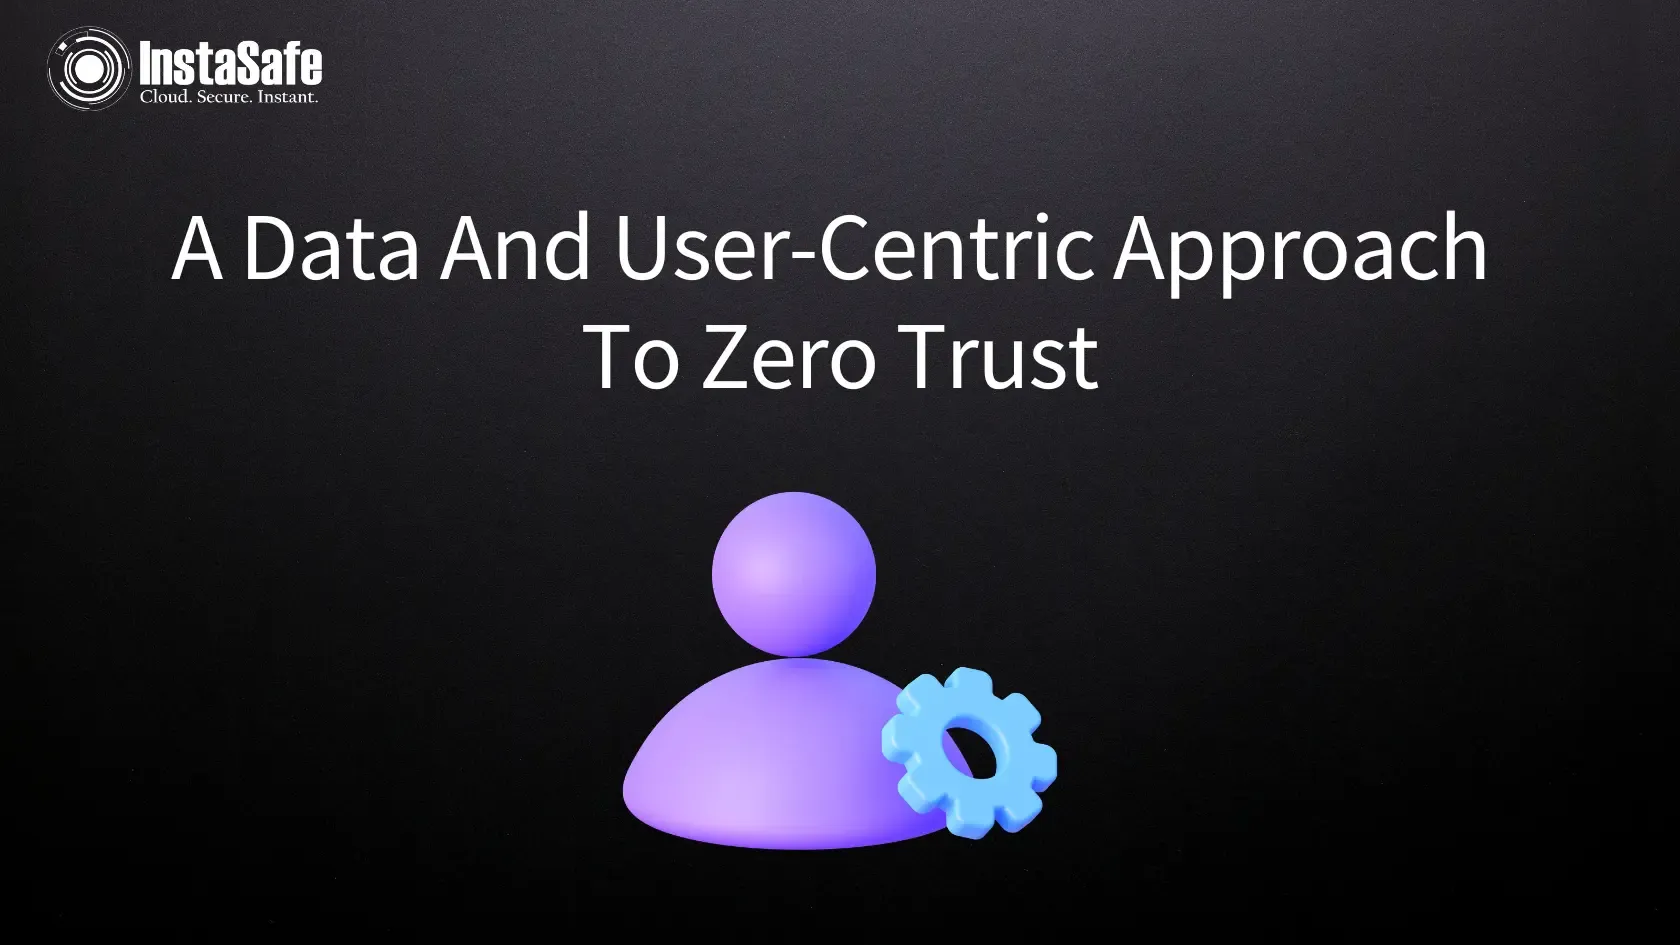 A Data And User-Centric Approach To Zero Trust